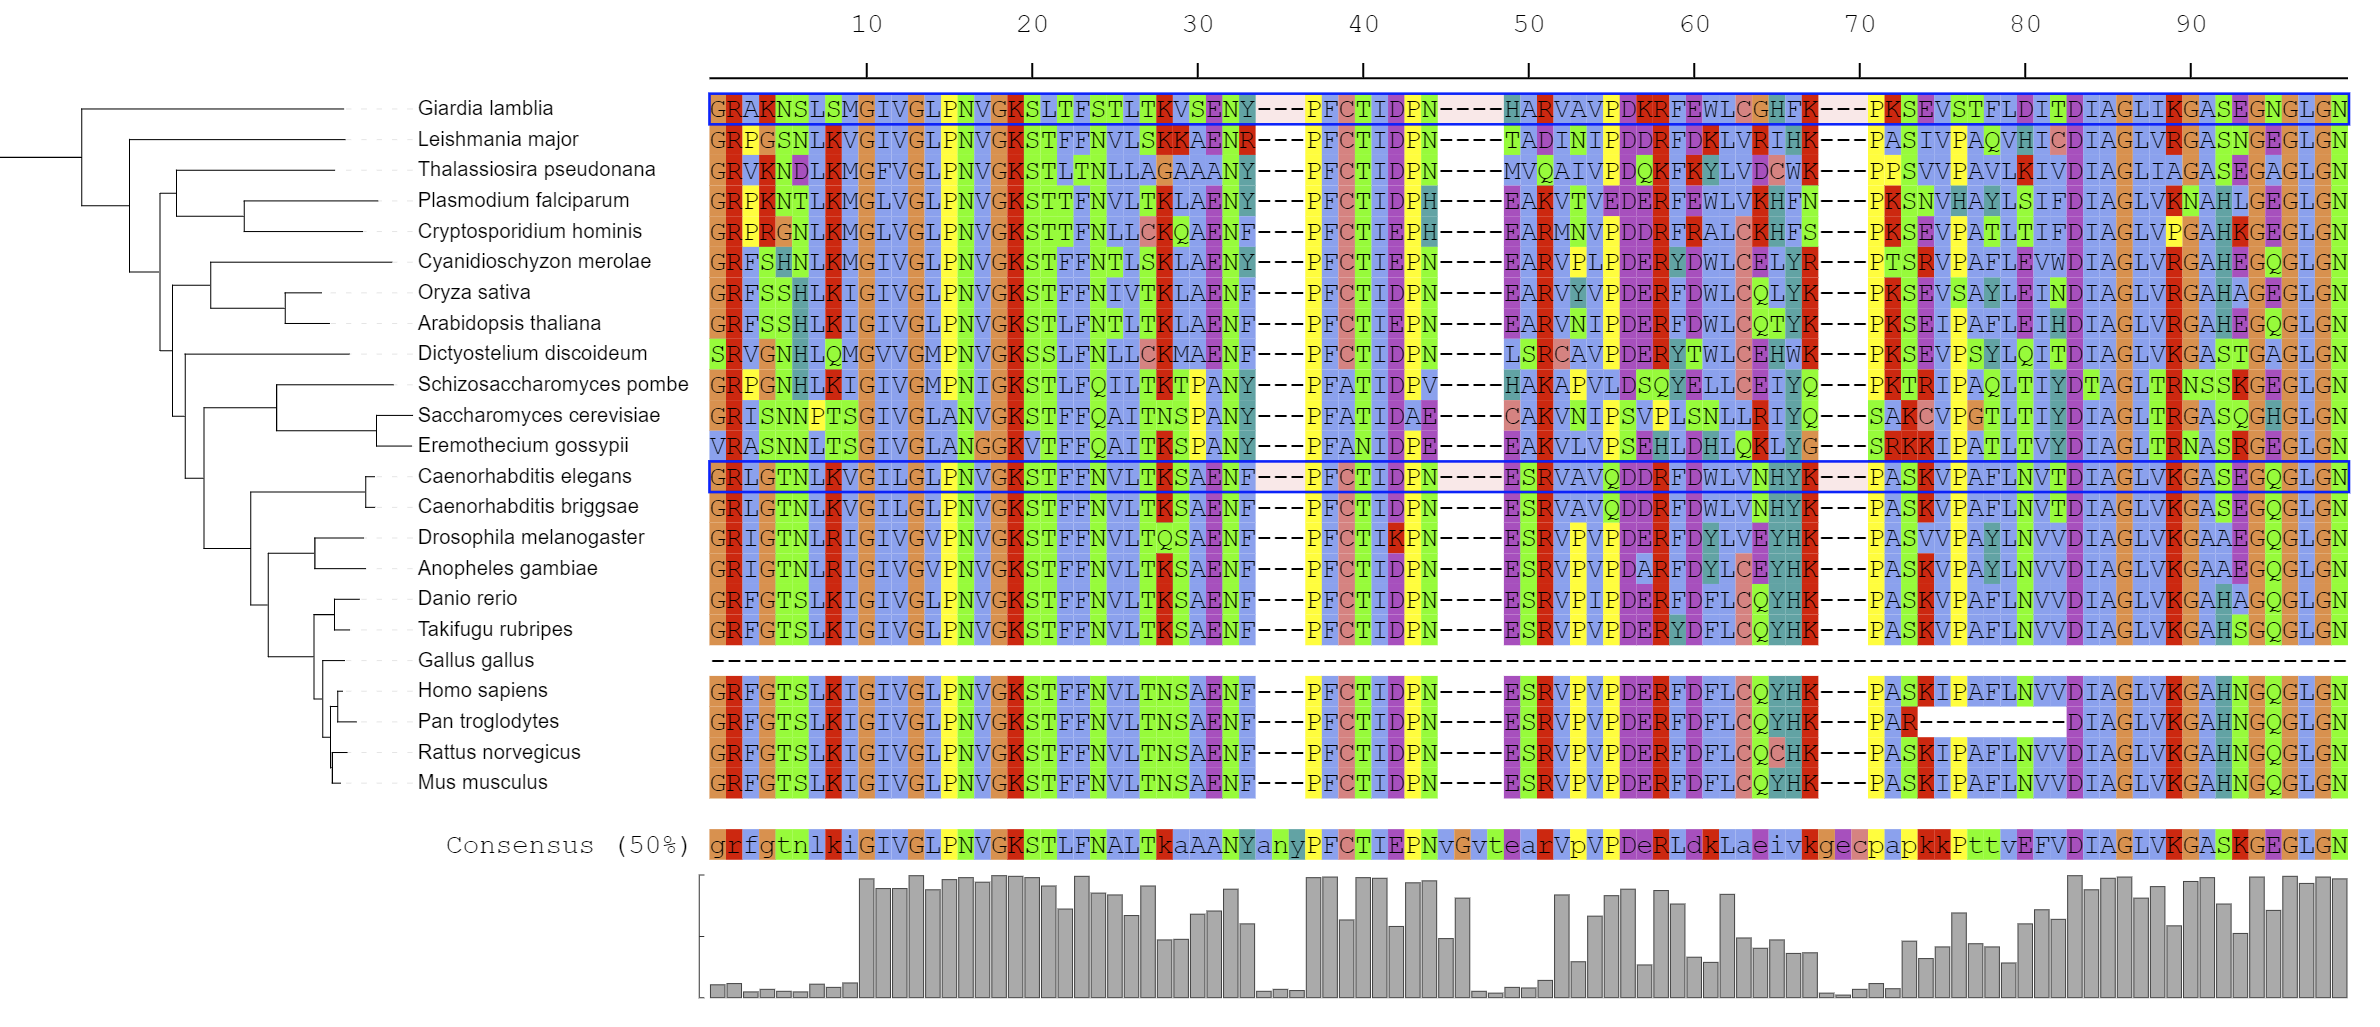 An example multiple sequence alignment visualized on a tree